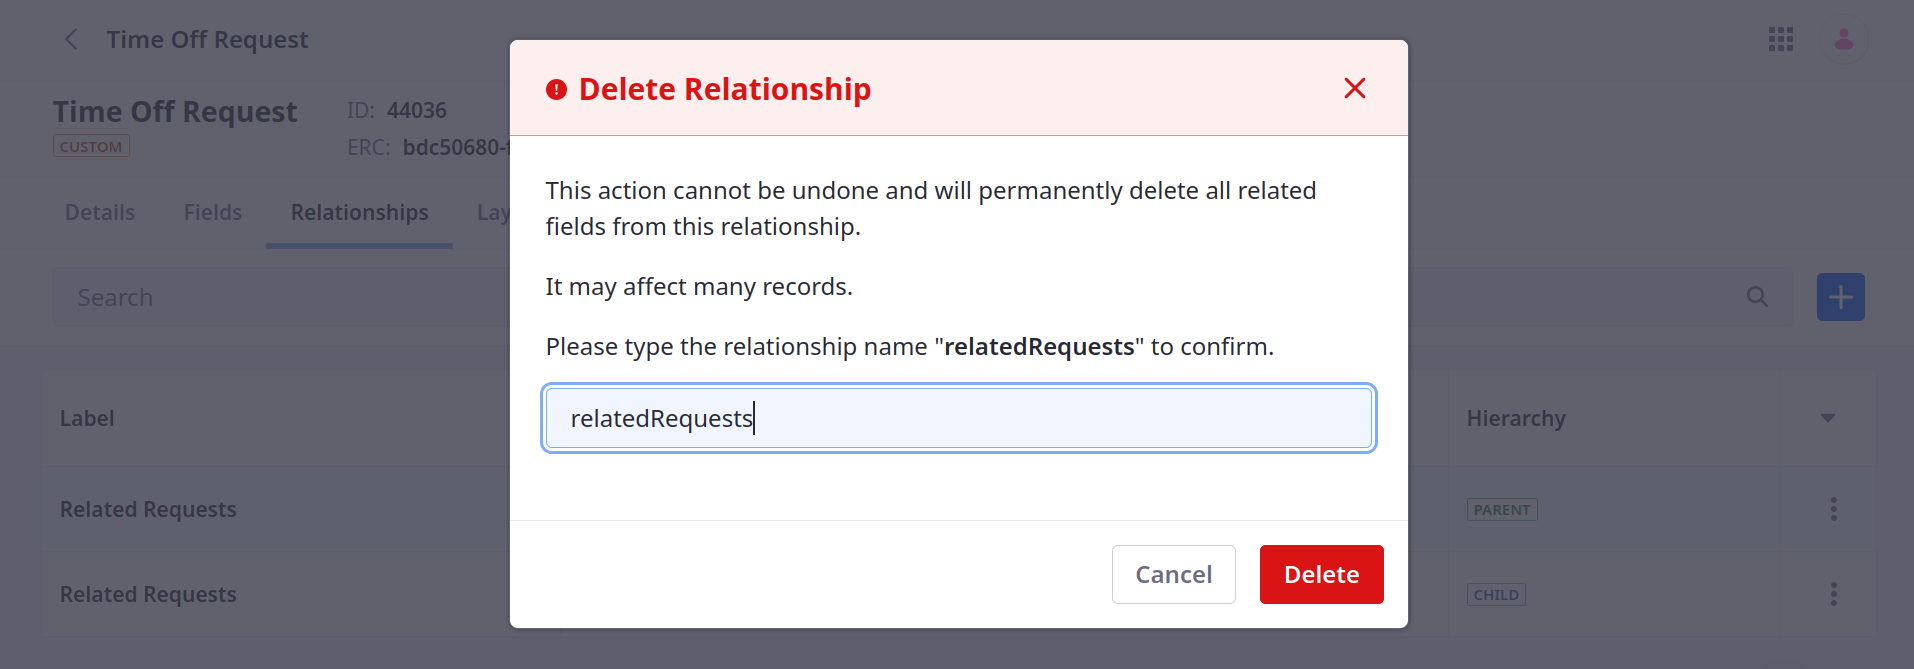 Enter the name of the relationship and click Done.